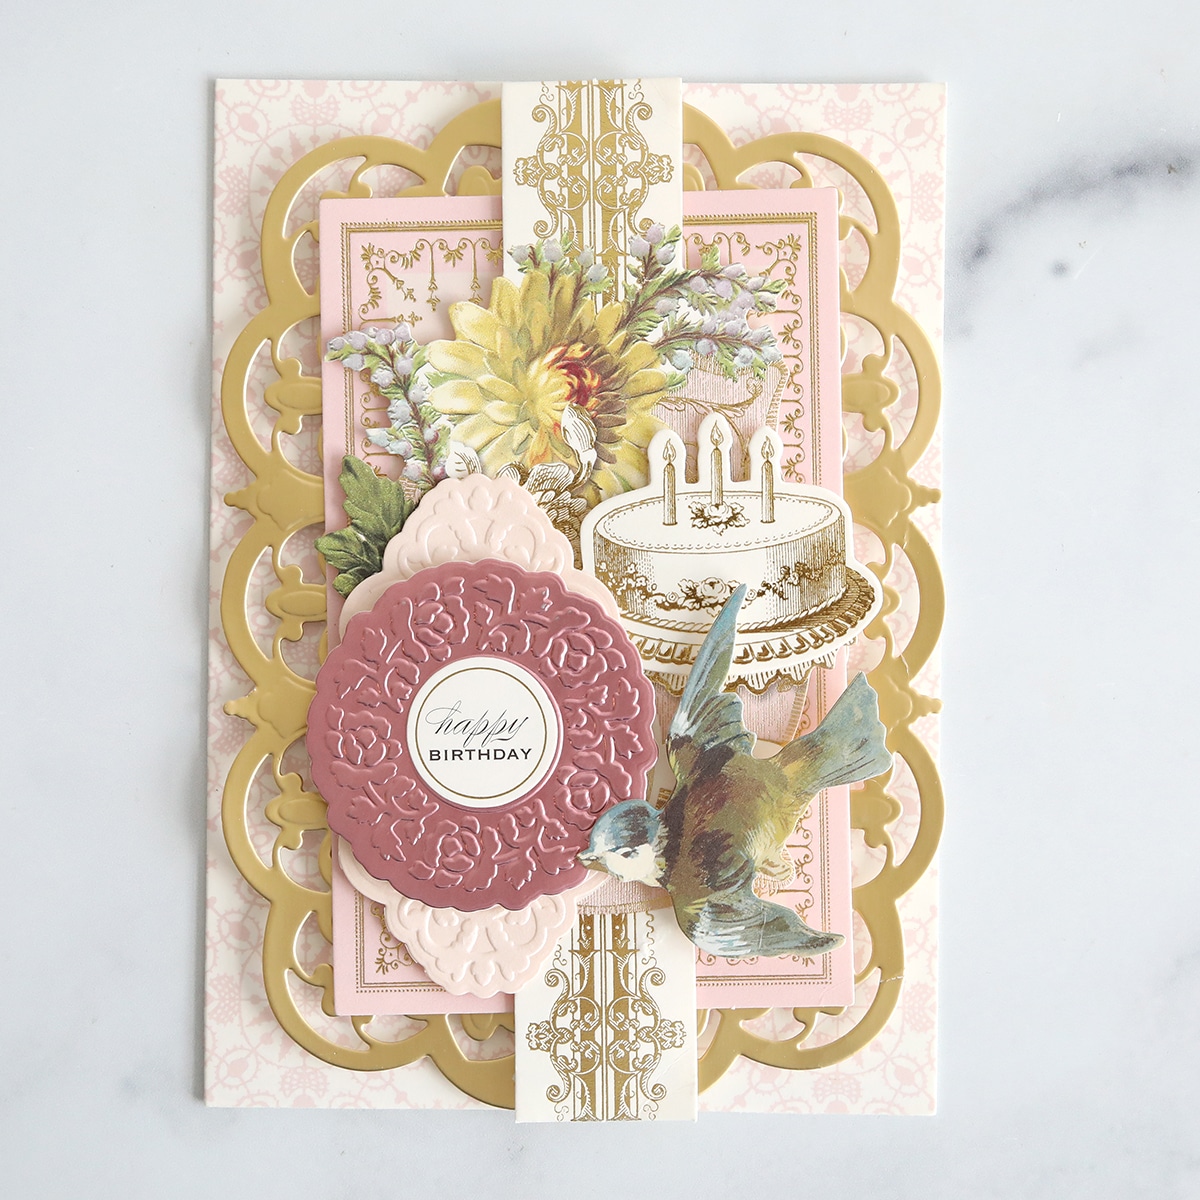 A pink and gold card with a bird and flowers.